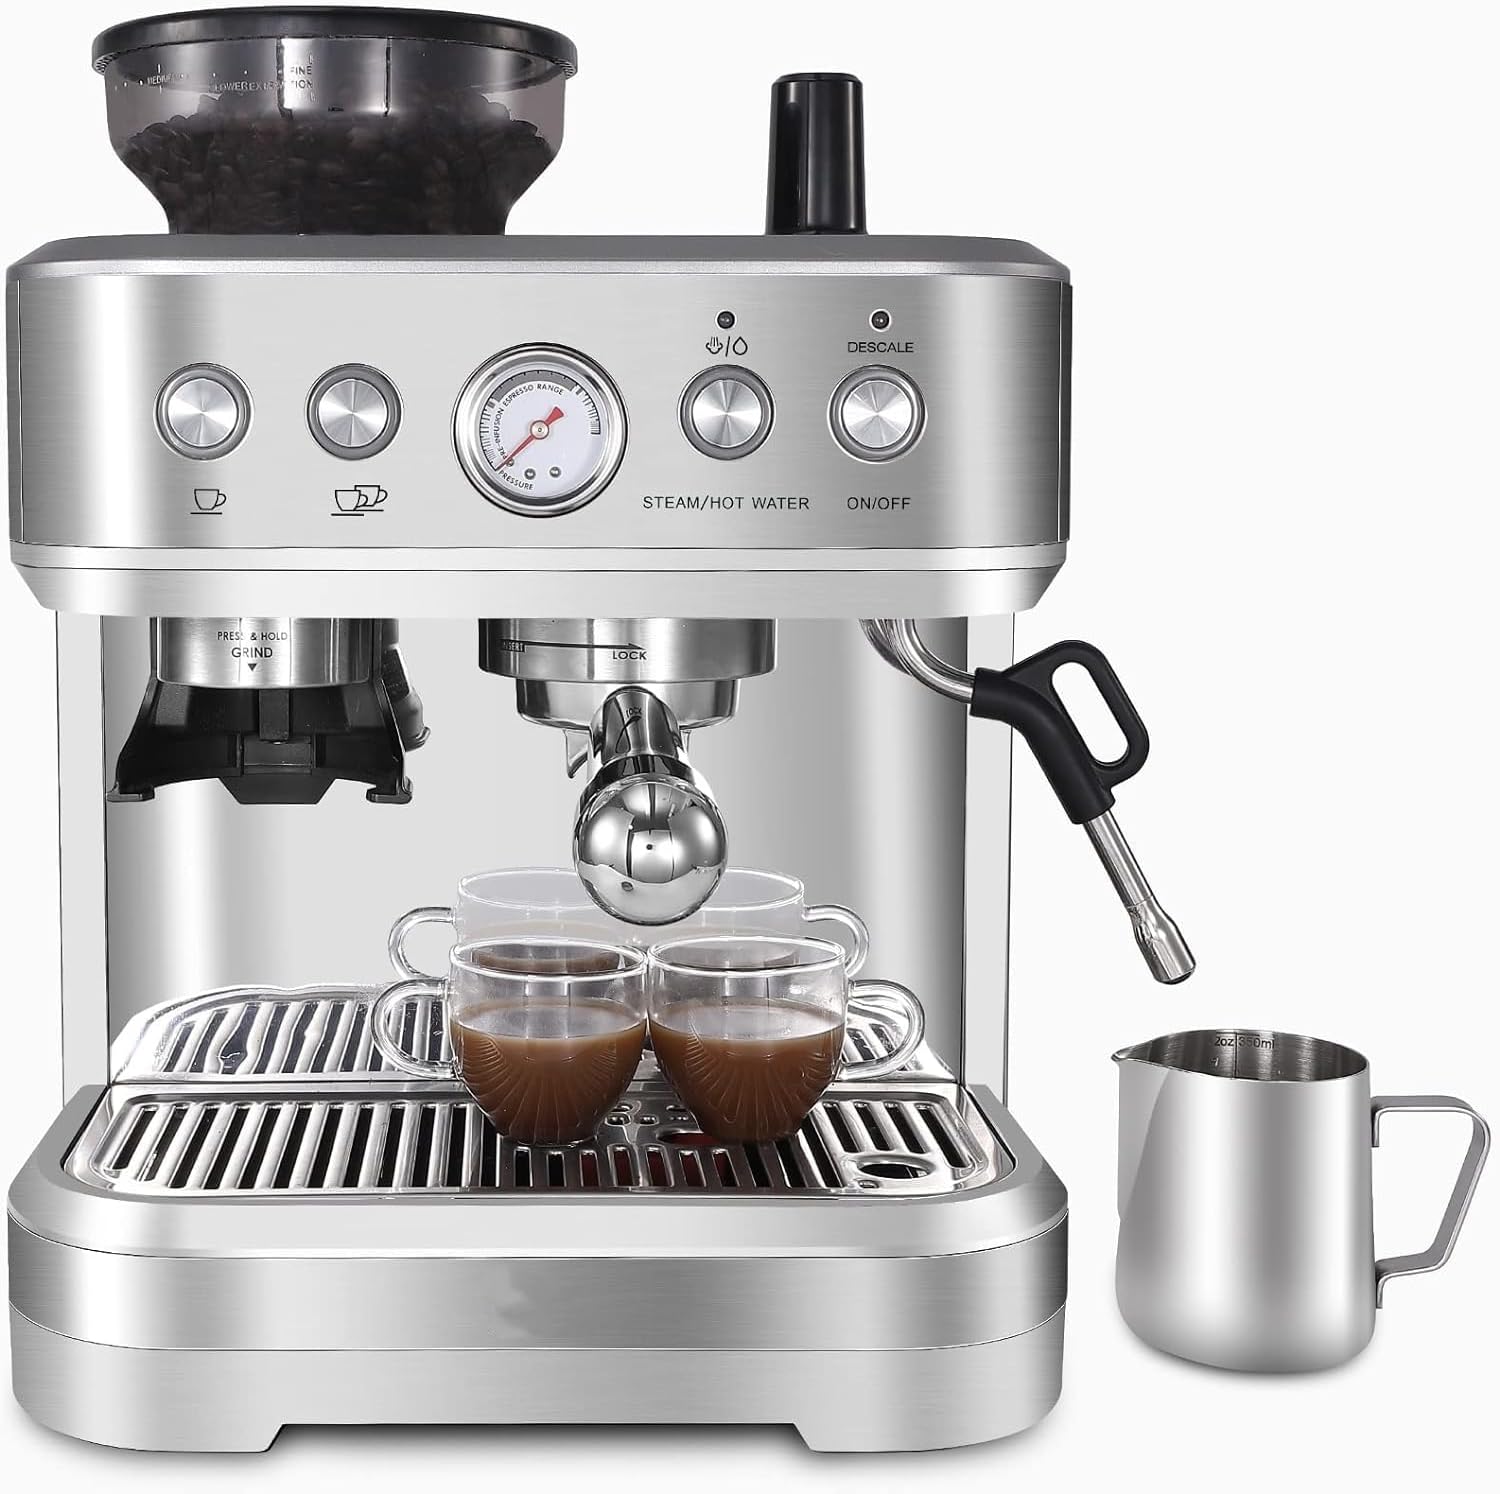 Belect Espresso portafilter machine, espresso machine with an integrated grinder and professional milk foam nozzle, stainless steel, silver